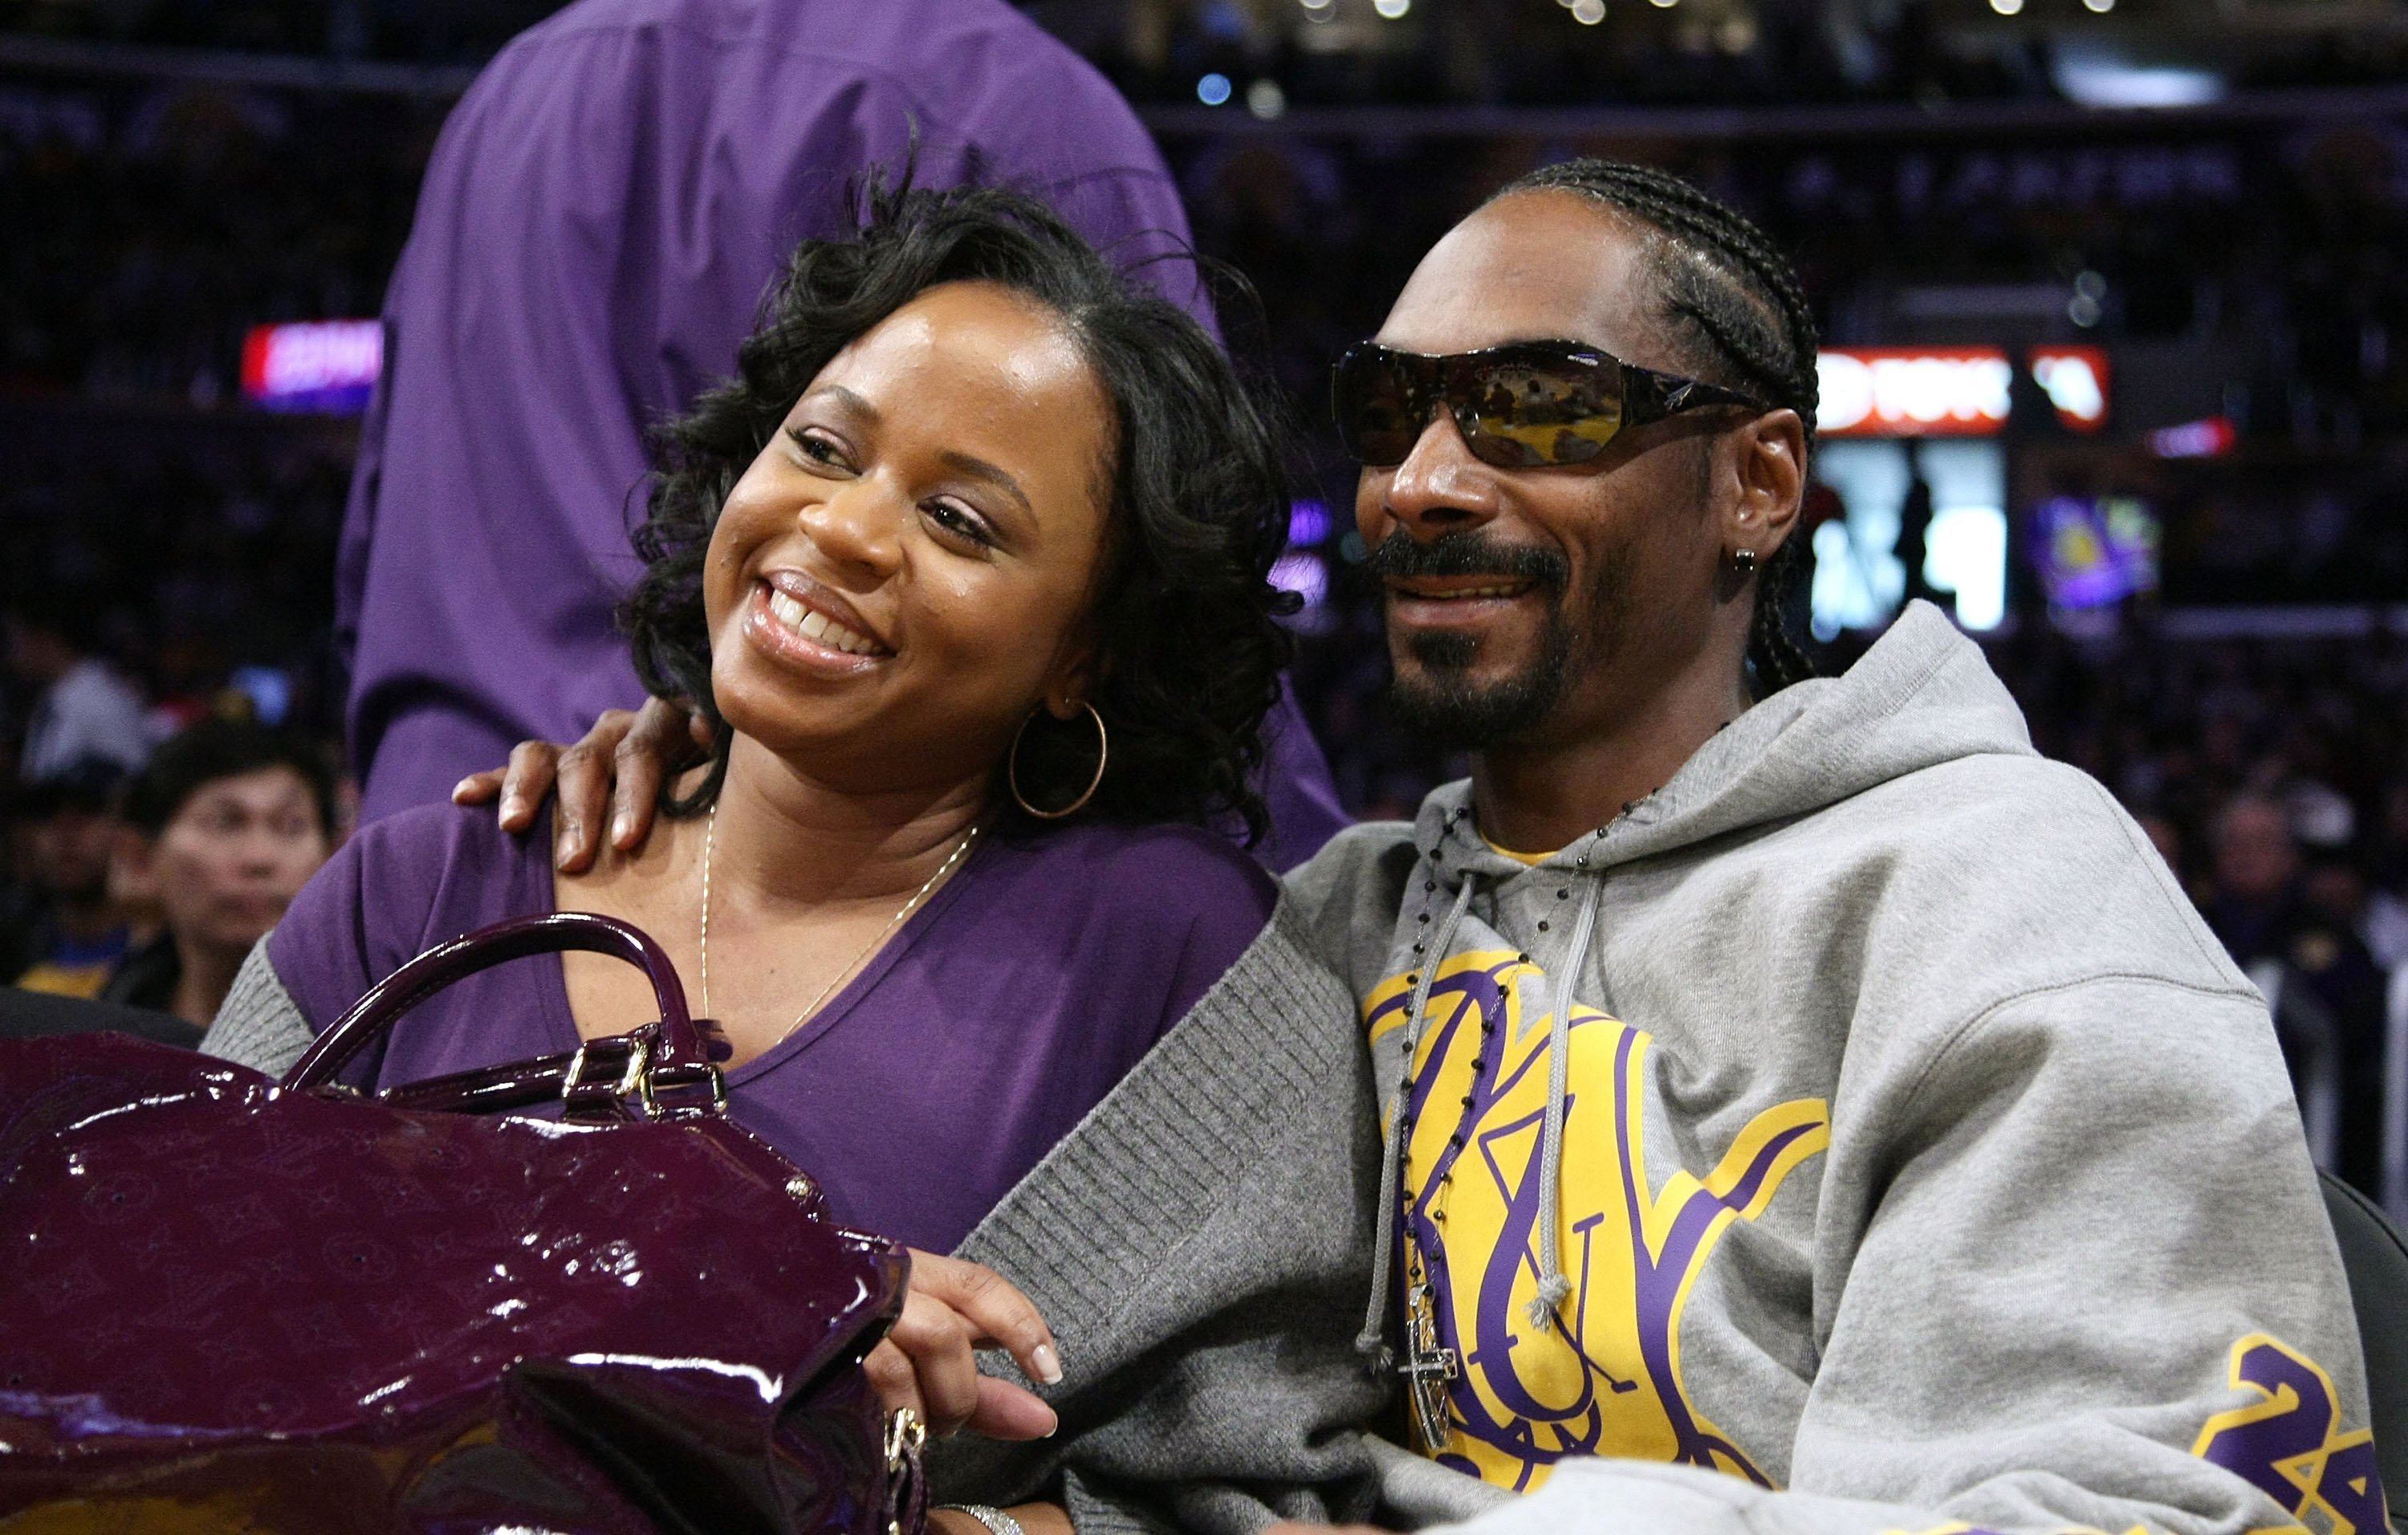 Snoop Dogg and Shante Broadus attend the Los Angeles Lakers vs Boston Celtics game on December 25, 2008. | Source: Getty Images 